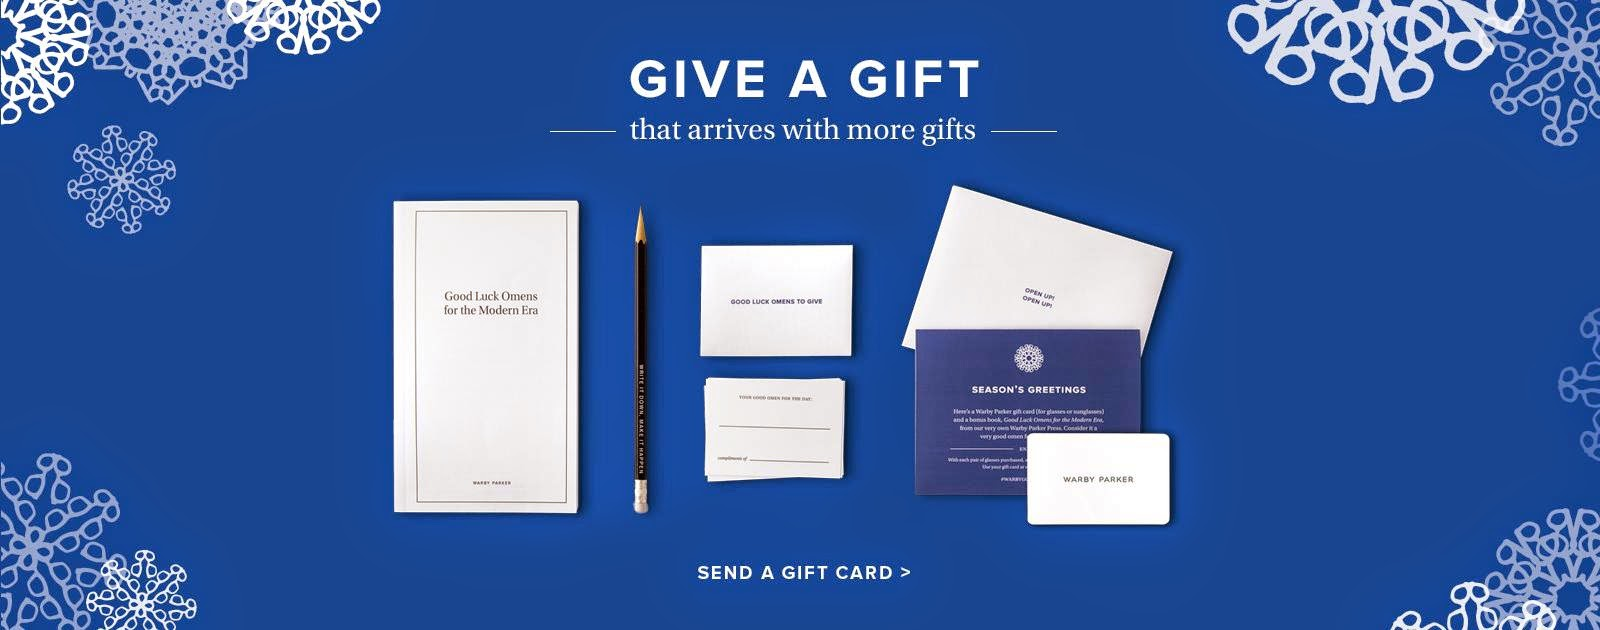 Warby Parker branded books for seasonal gifting activity in store